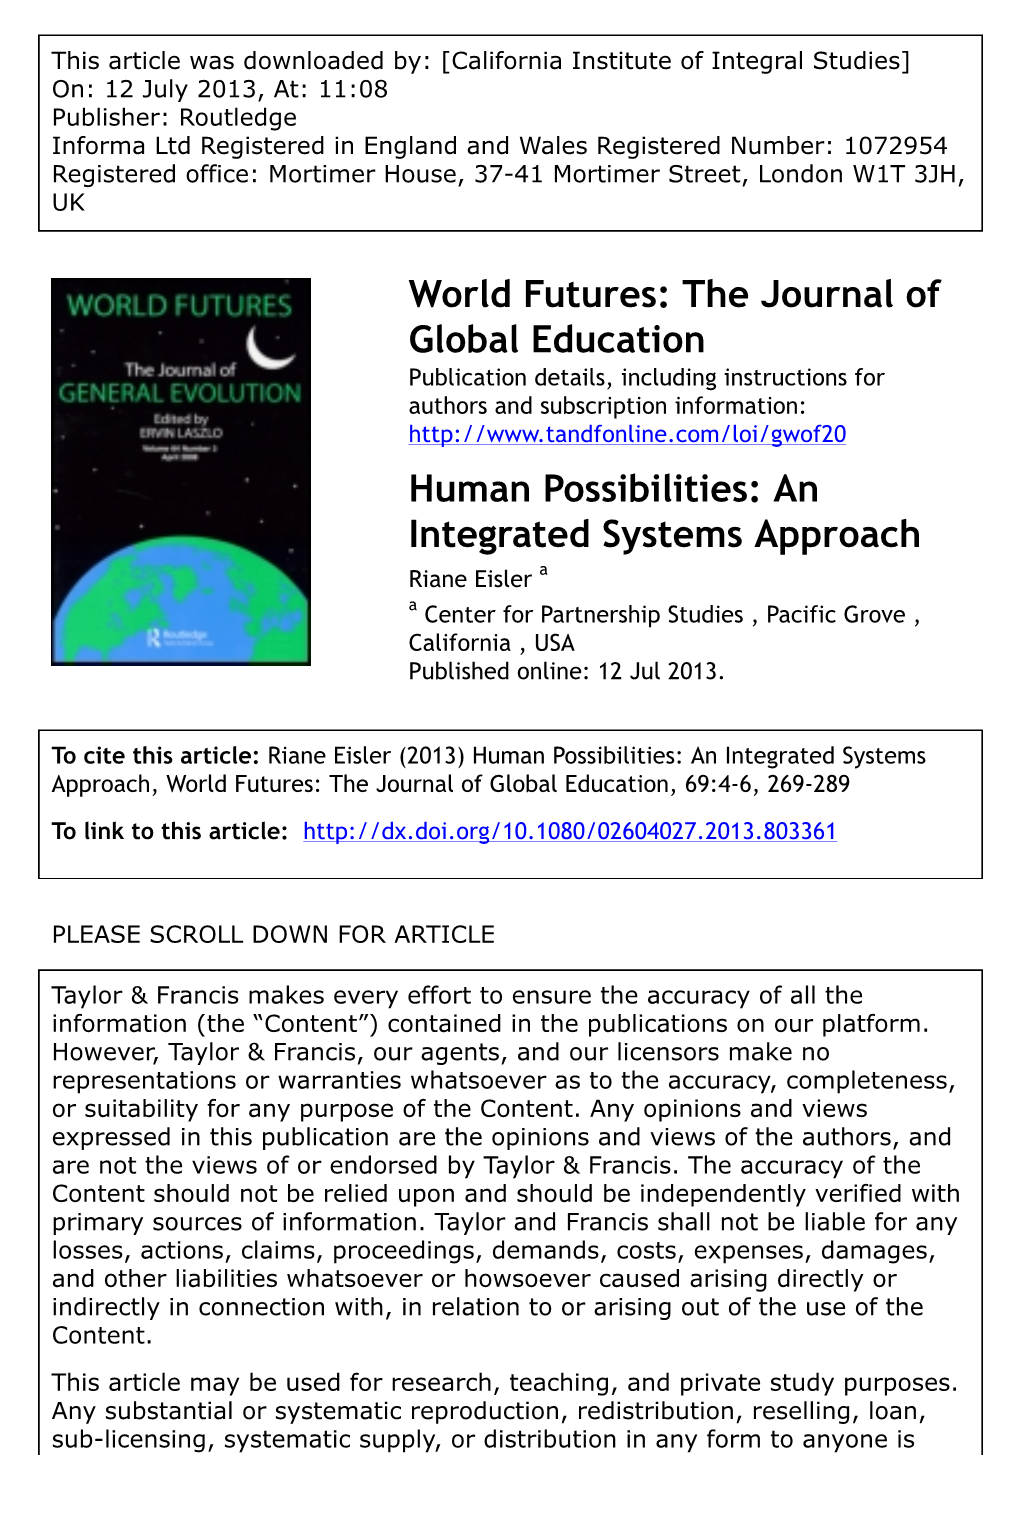 Human Possibilities: an Integrated Systems Approach Riane Eisler a a Center for Partnership Studies , Pacific Grove , California , USA Published Online: 12 Jul 2013